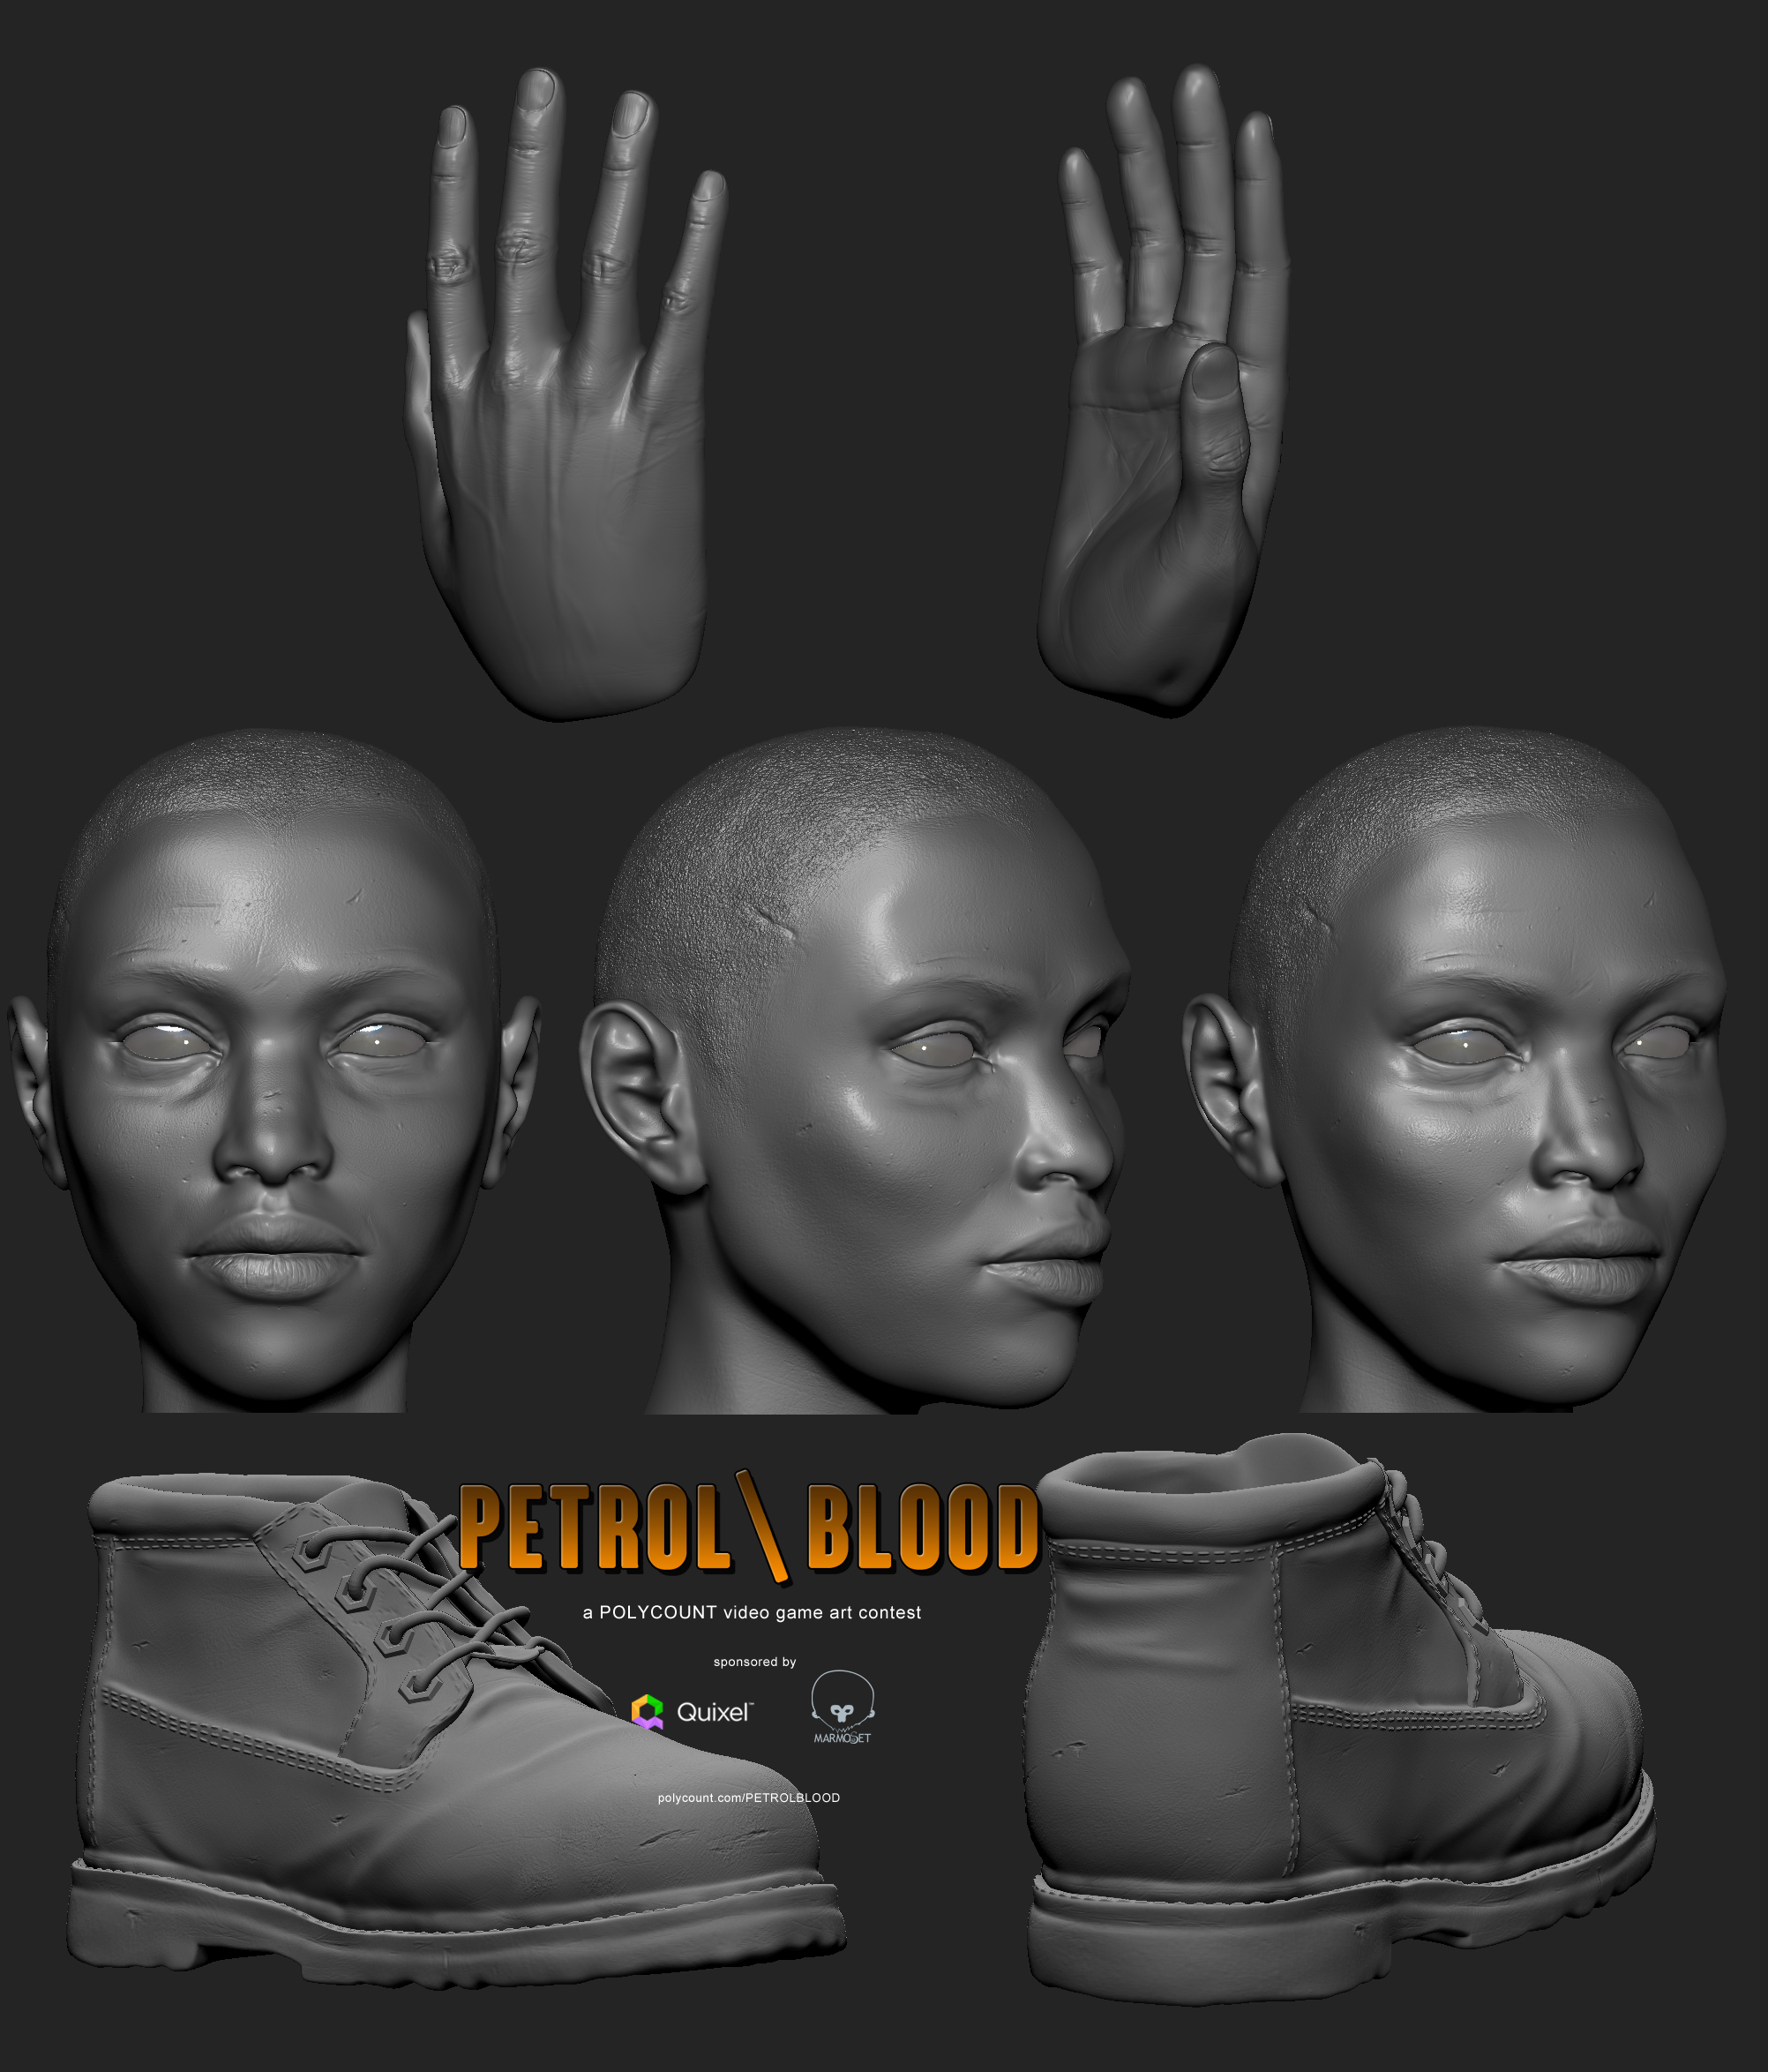 petroblood_wip_03_headhandsboots_by_theartistictiger-d7ra78i.jpg